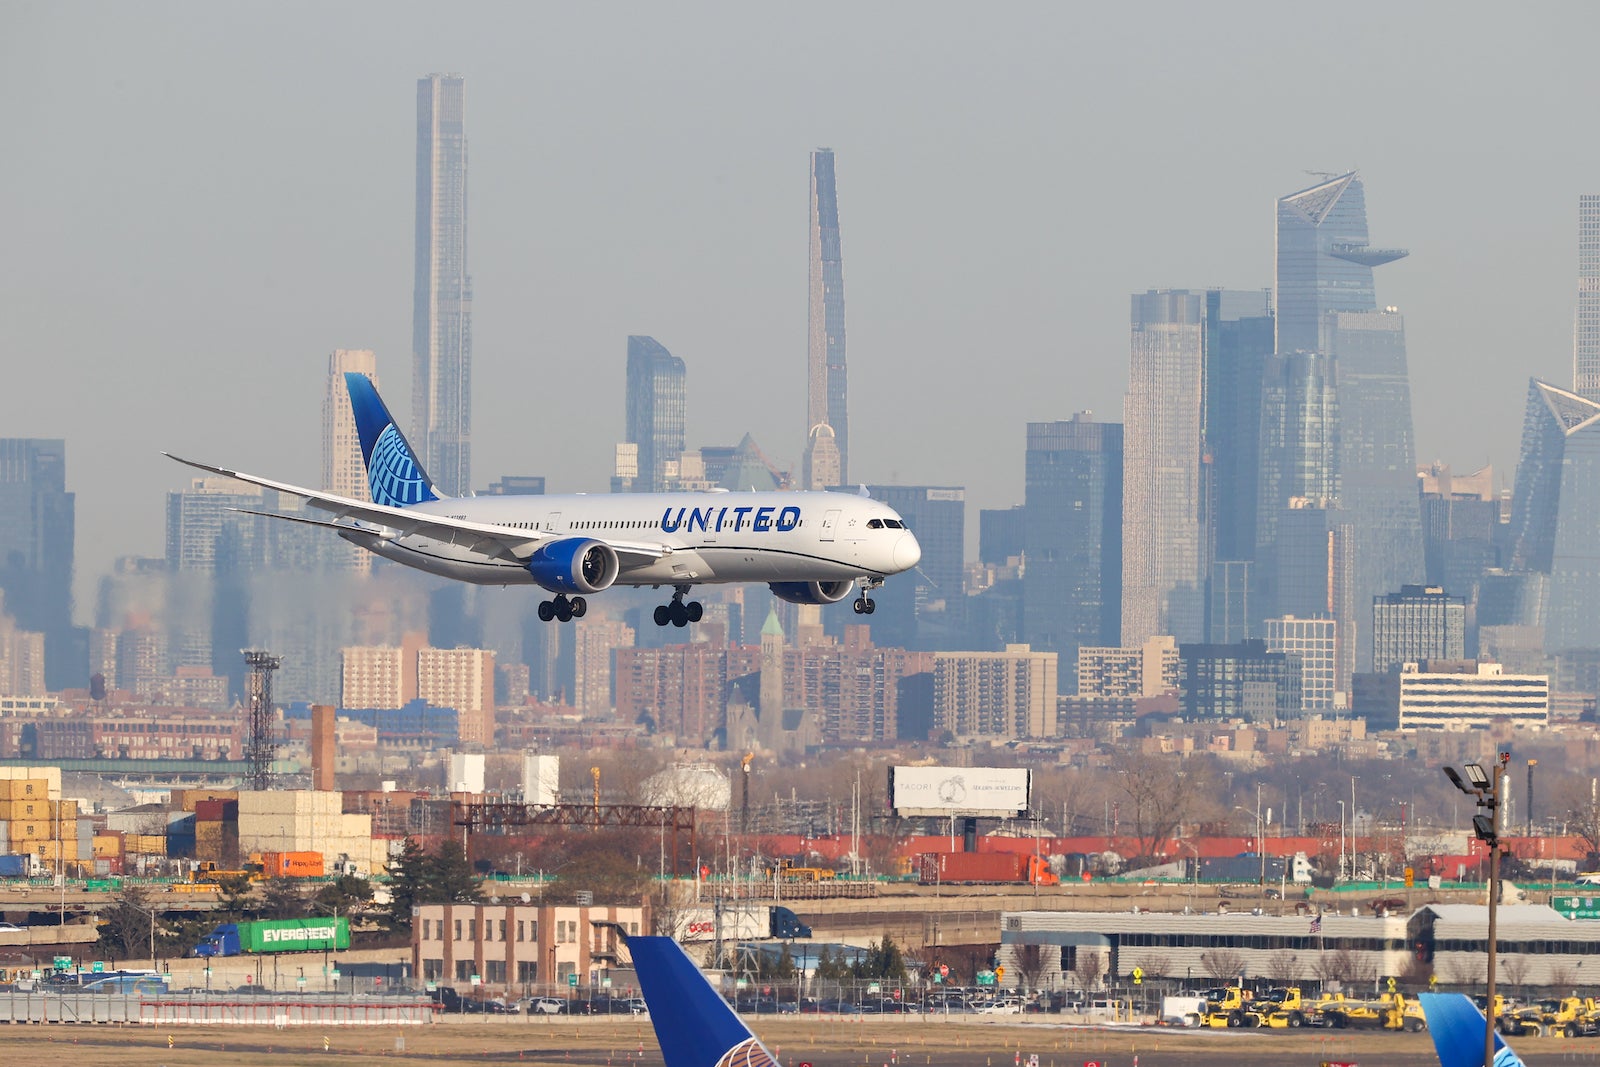 Today only: One-way United fares as low as $39 or 3,900 miles